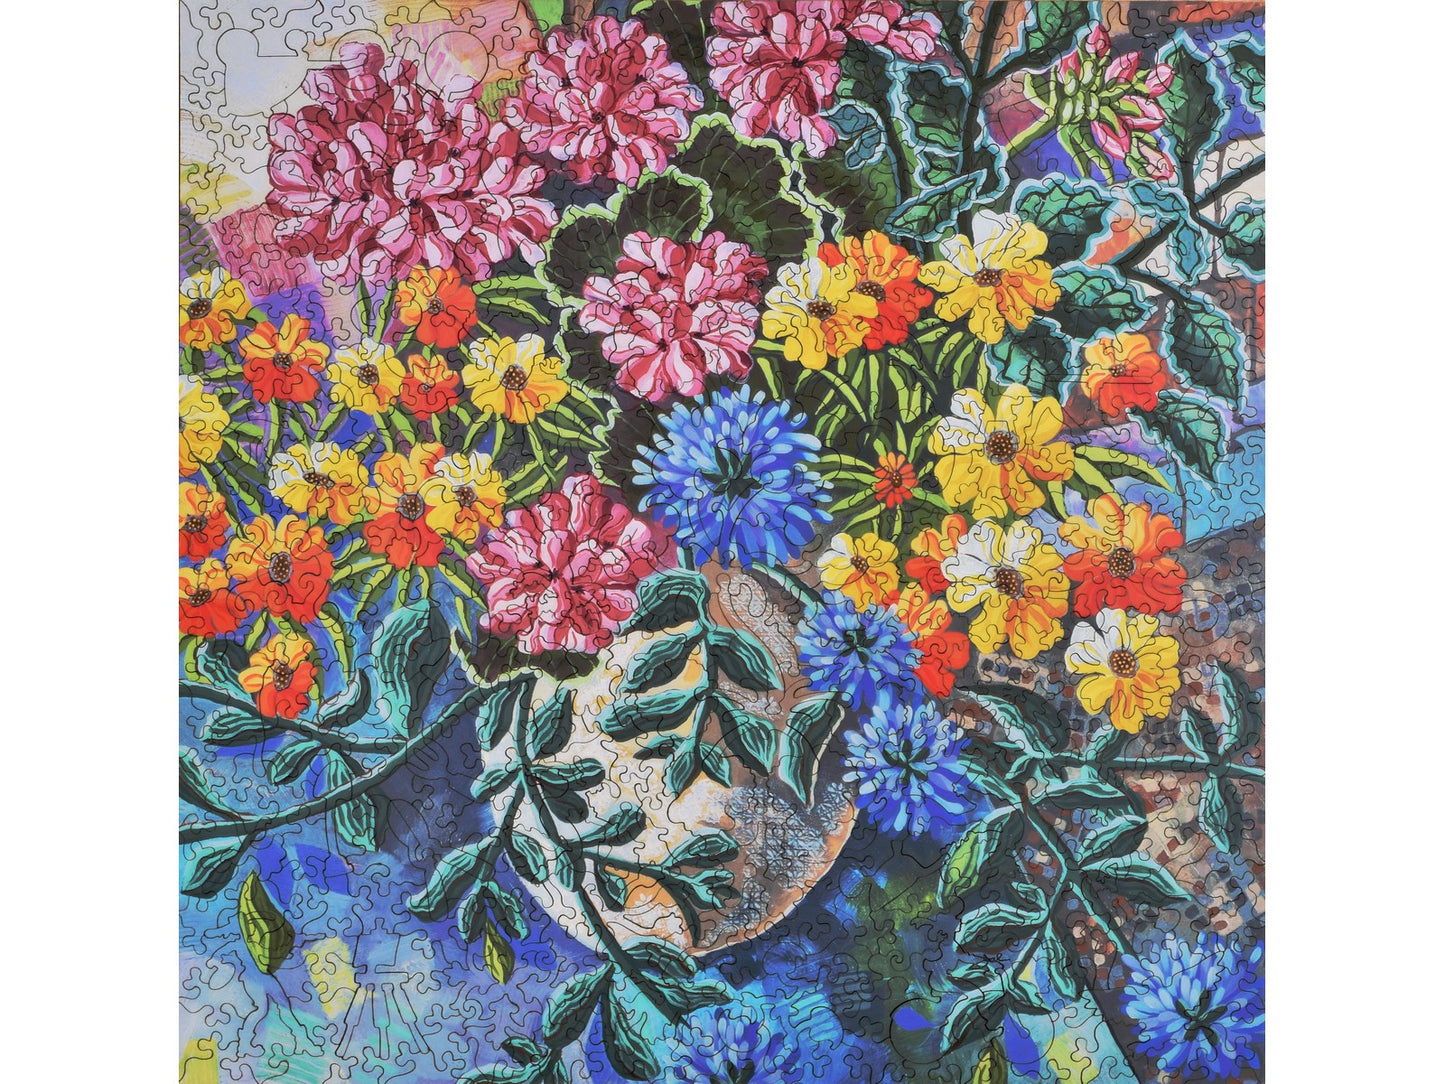 The front of the puzzle, Summer Geraniums, which shows a colorful bouquet of flowers.